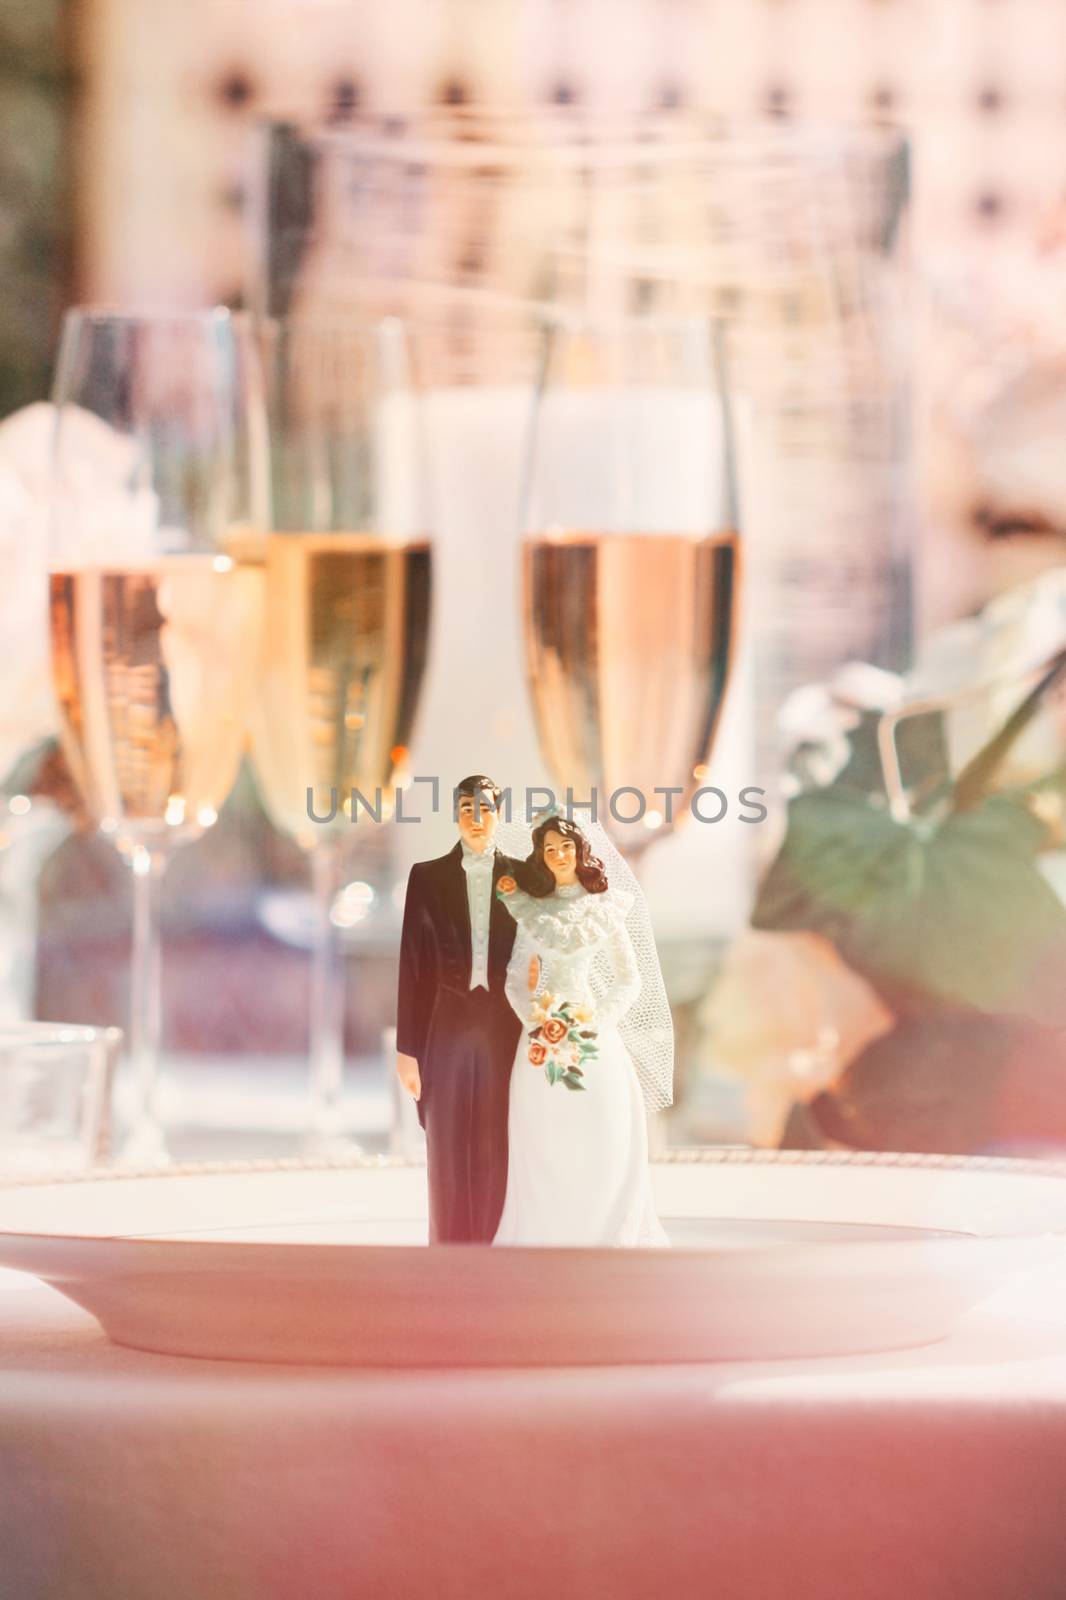 Cake figurines on dinner plate at reception by Sandralise